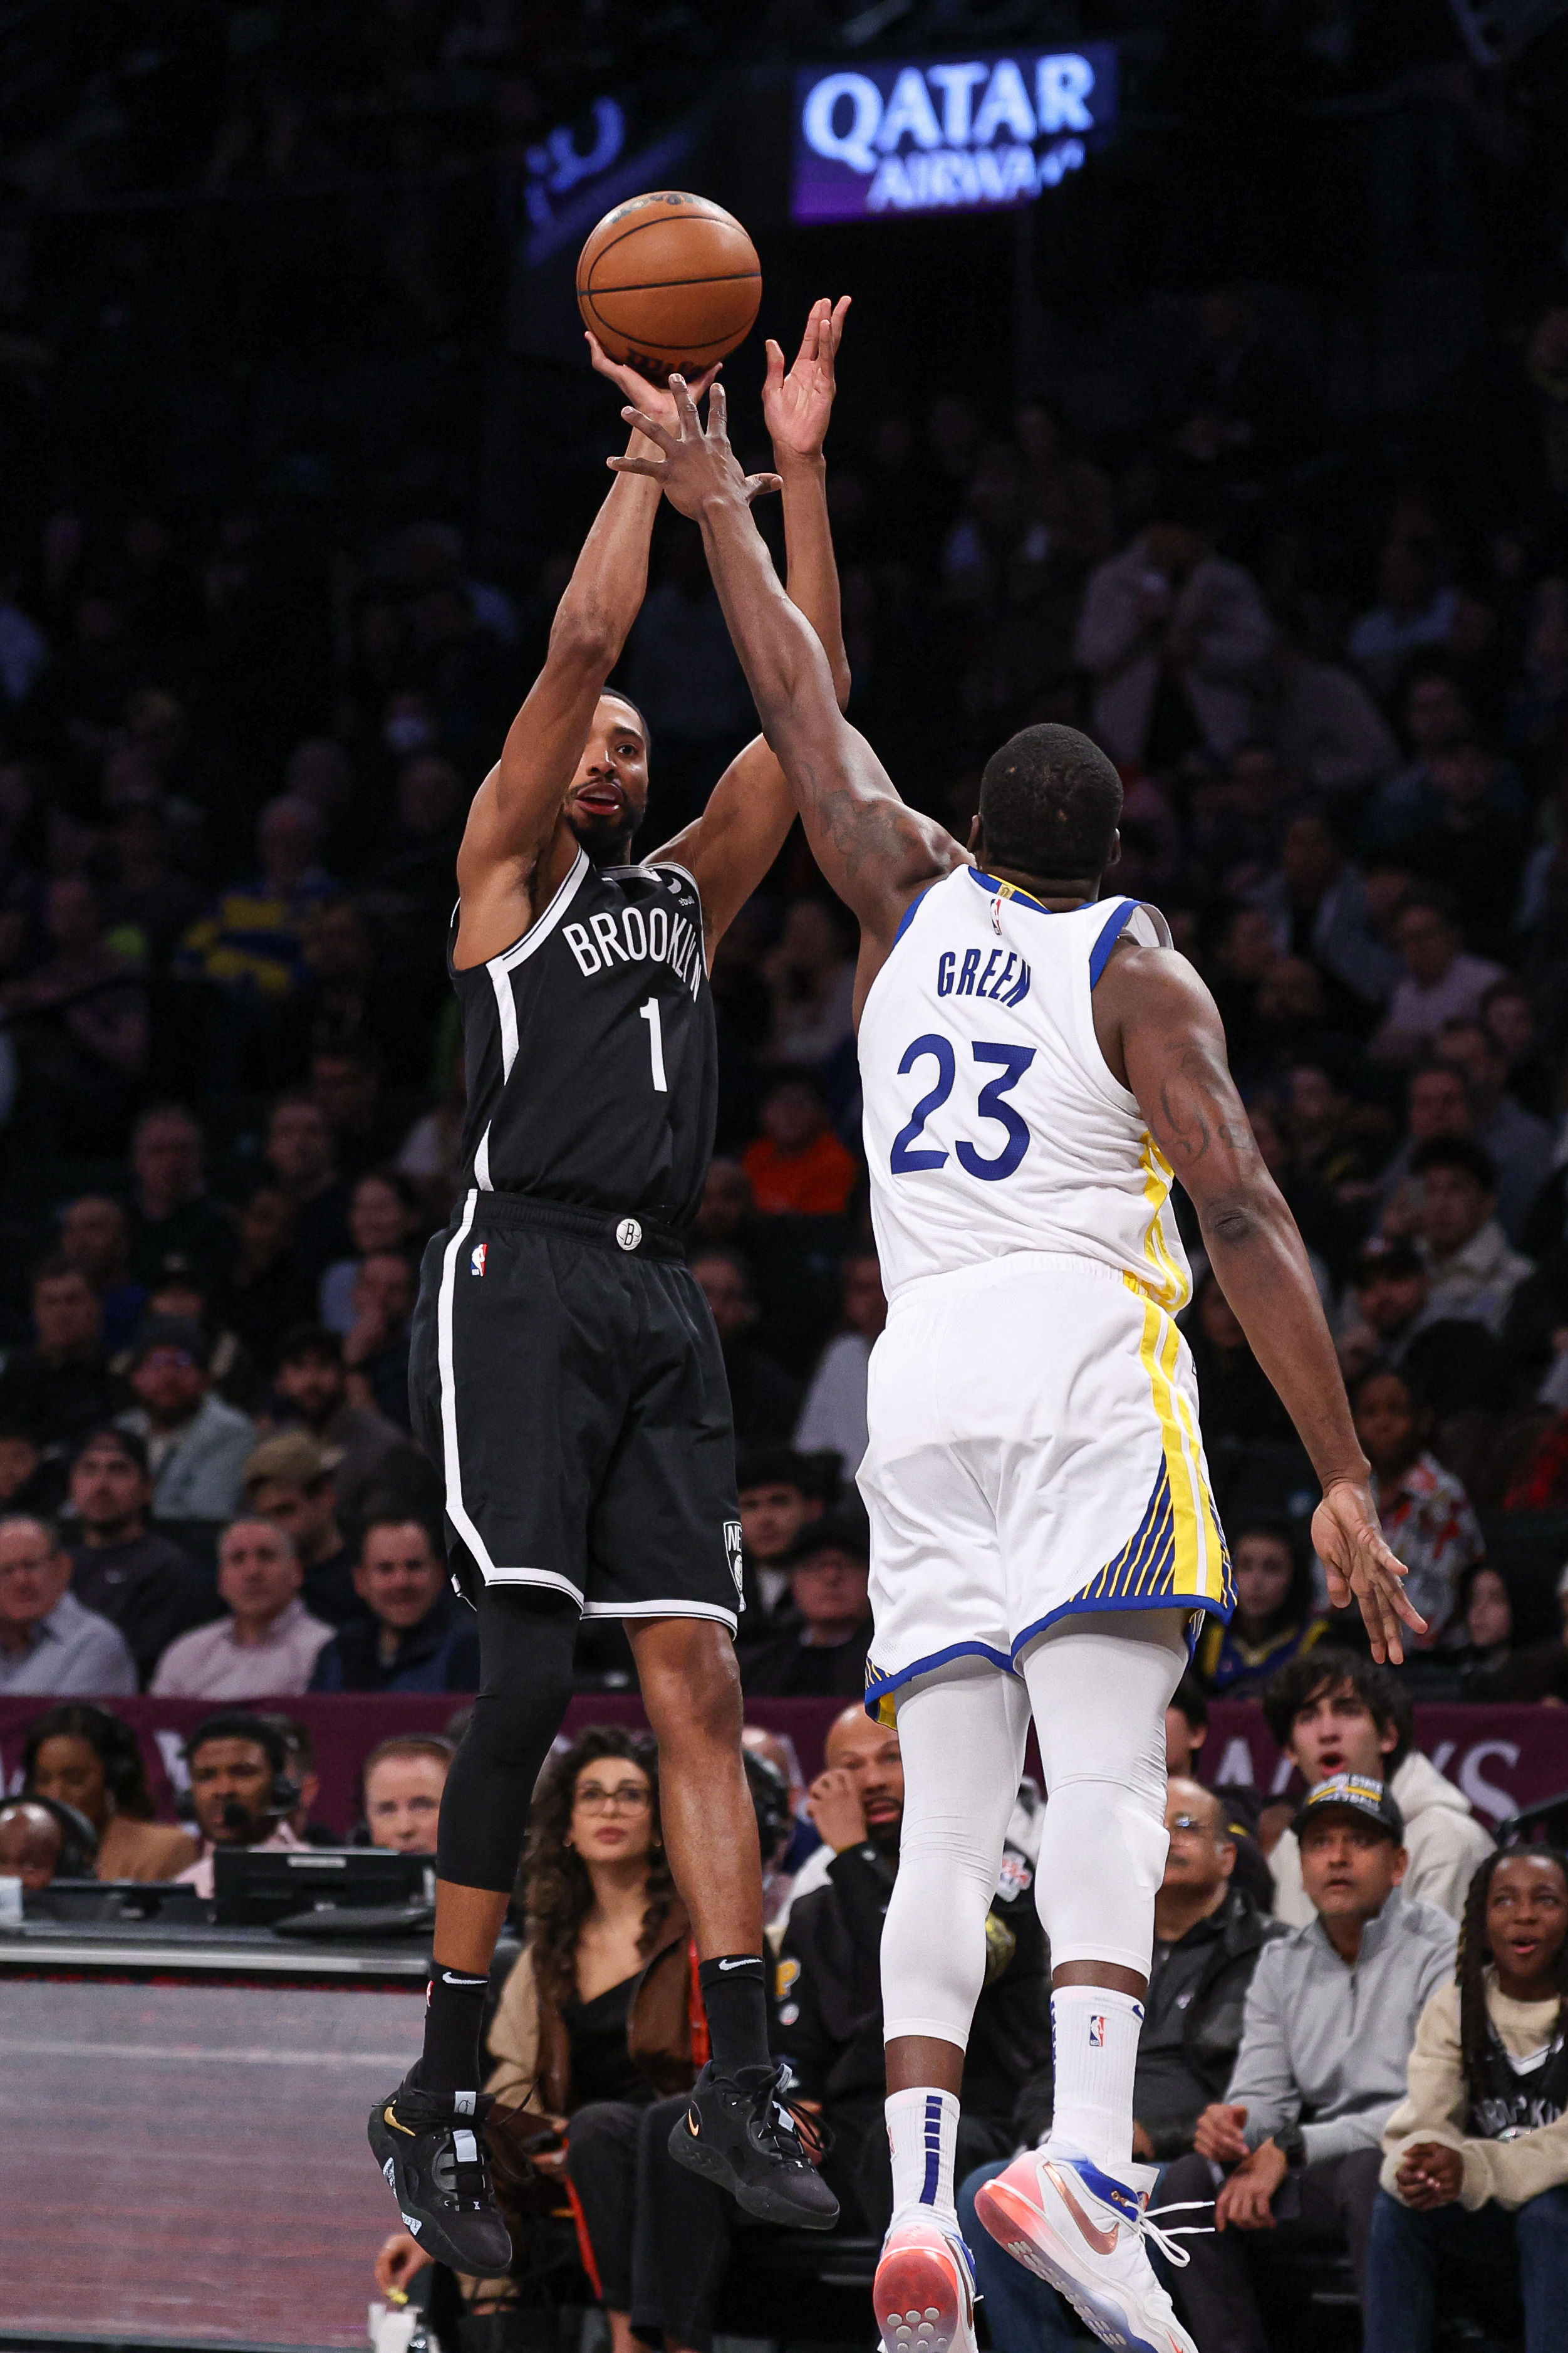 Stephen Curry, Warriors pull away for win over Nets